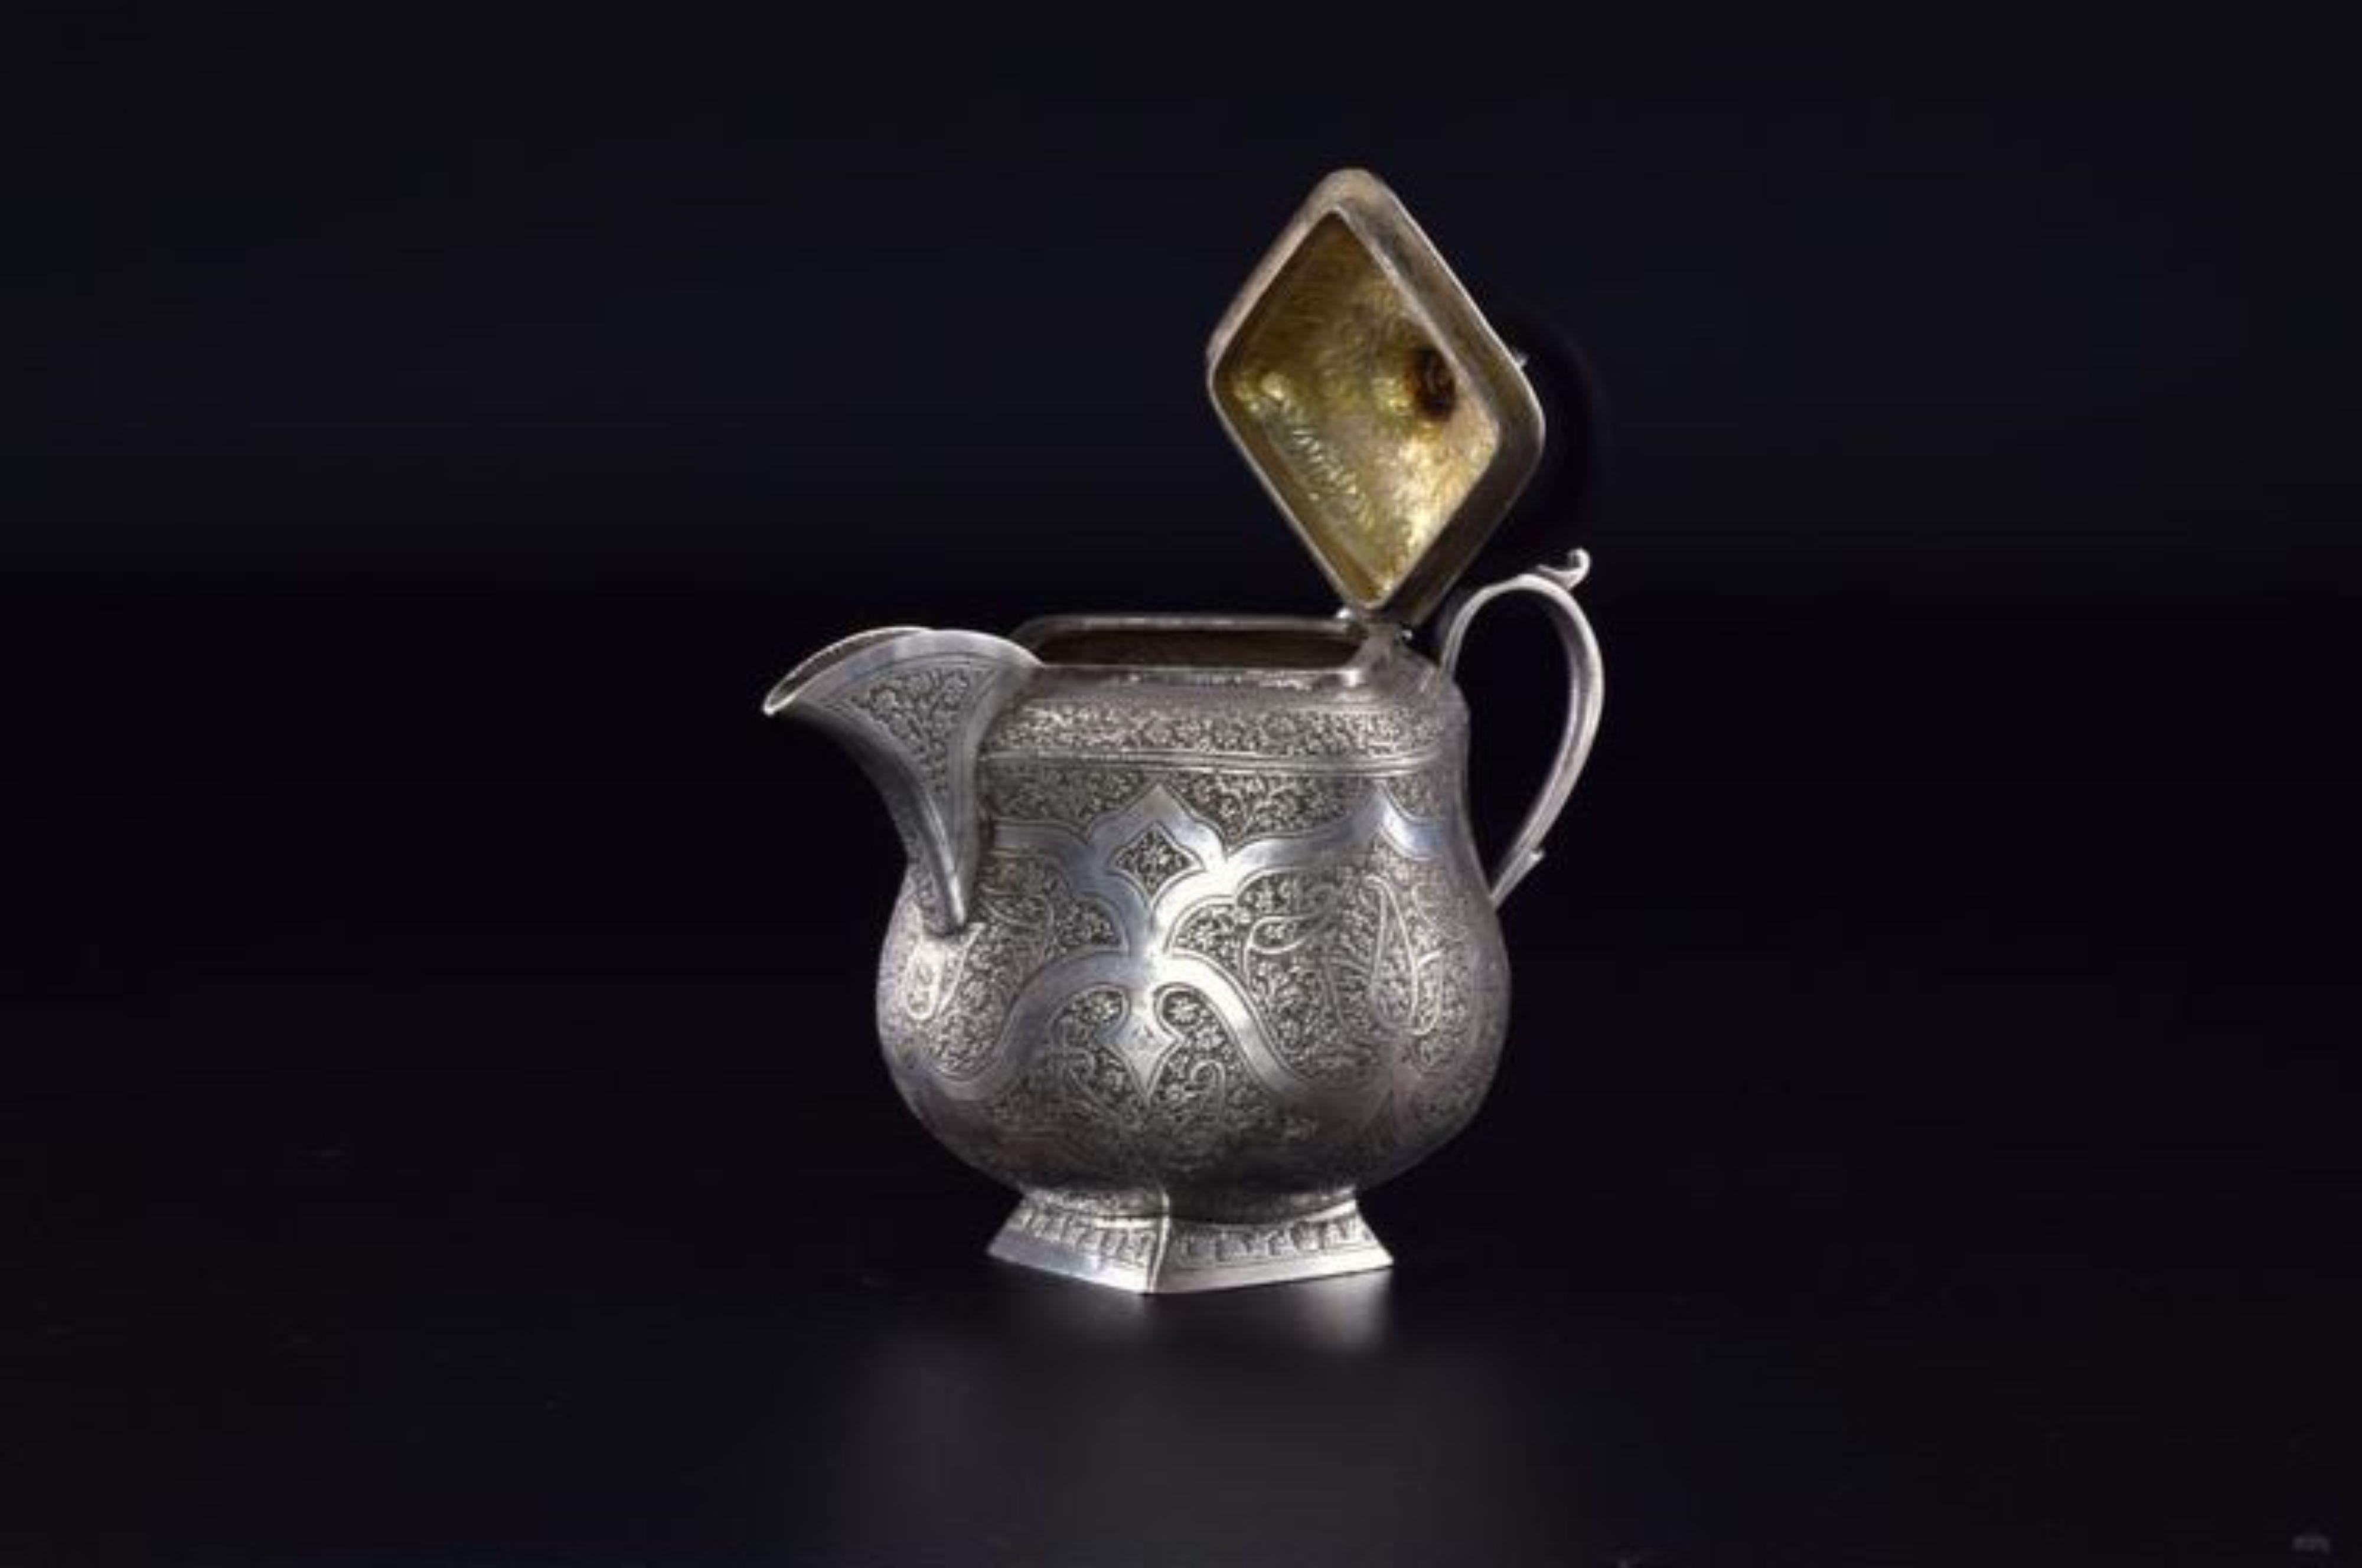 A handcrafted Moorish sterling small silver teapot handcrafted in the 1950s. What truly sets this piece apart are the intricate hand-engraved Moorish patterns.

Weighing 316g, this teapot is fully functional but can also stand as a decorative